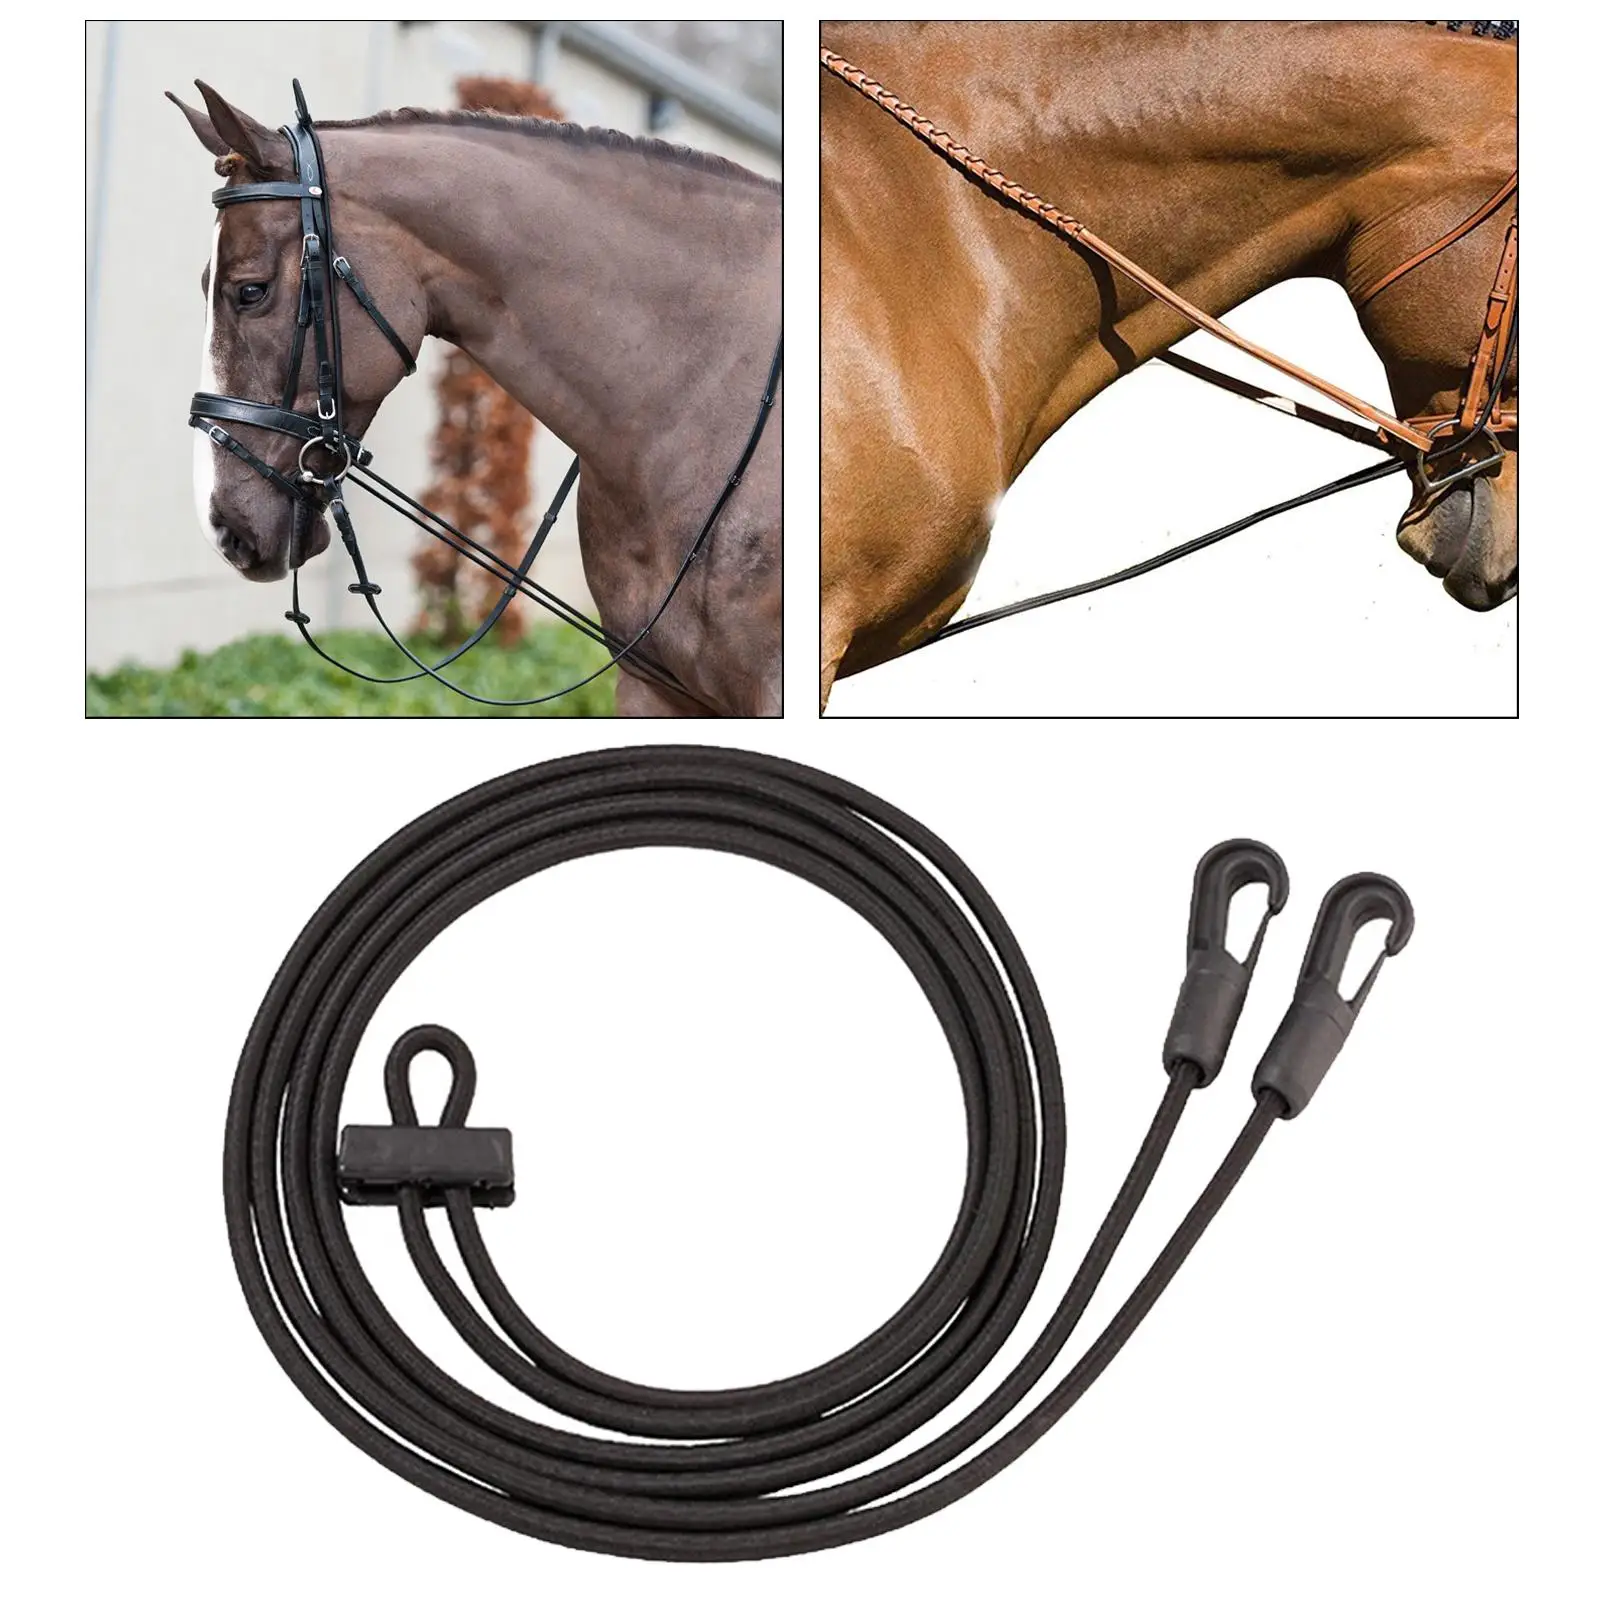 3M Horse Roping Reins Pulling Training Rope Comfortable Elastic Neck Stretcher for Equestrian Accessories Grooming Correct Aid